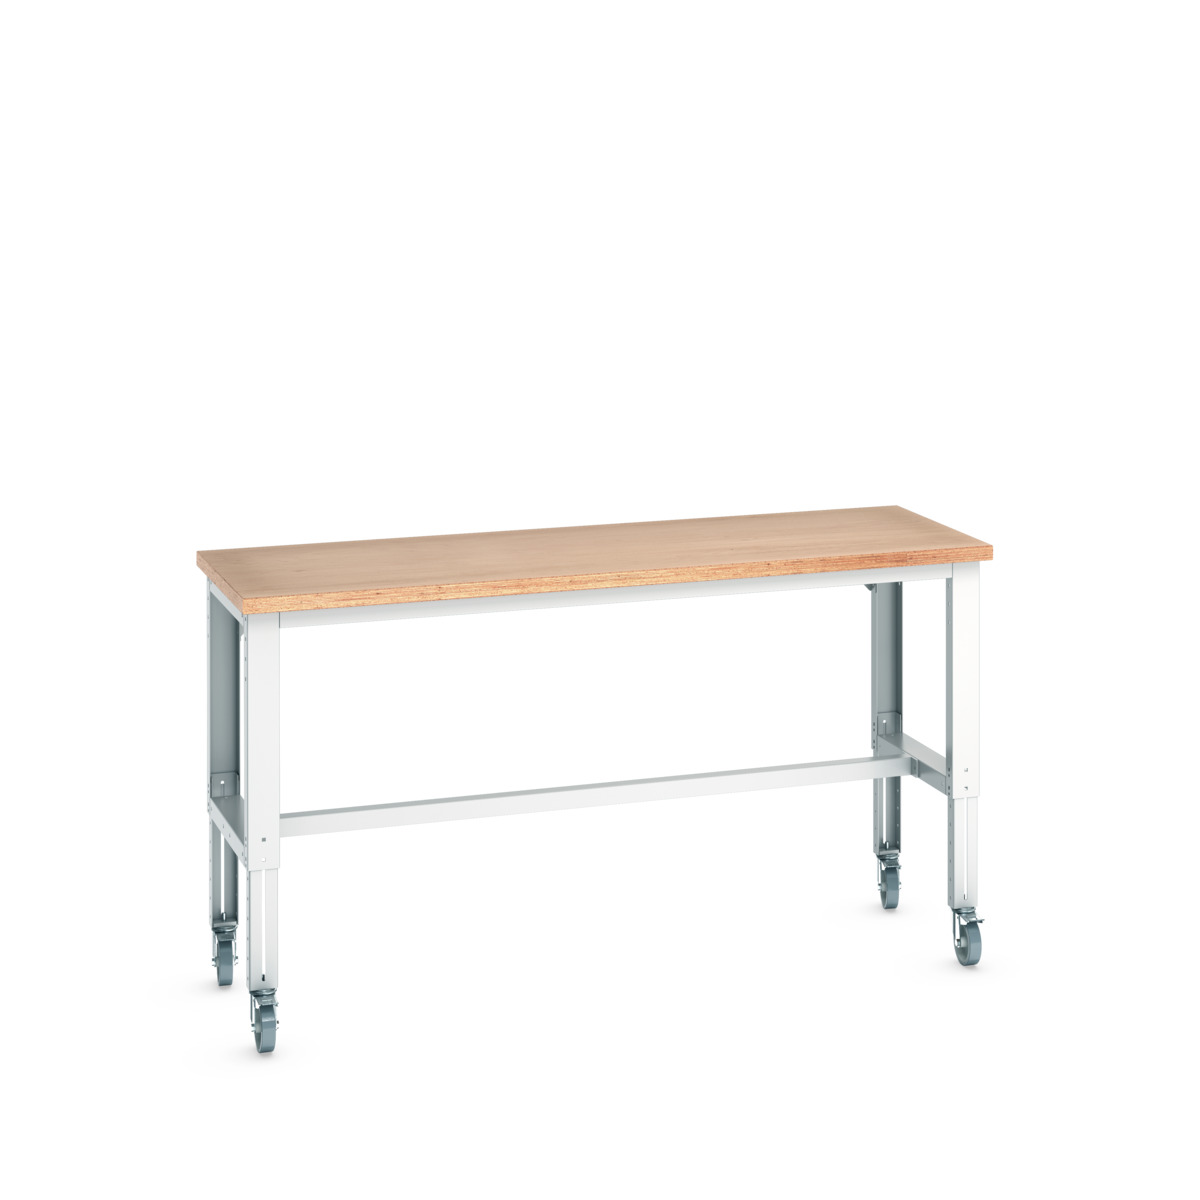 41003292.16V - cubio mobile bench adj height (mpx)